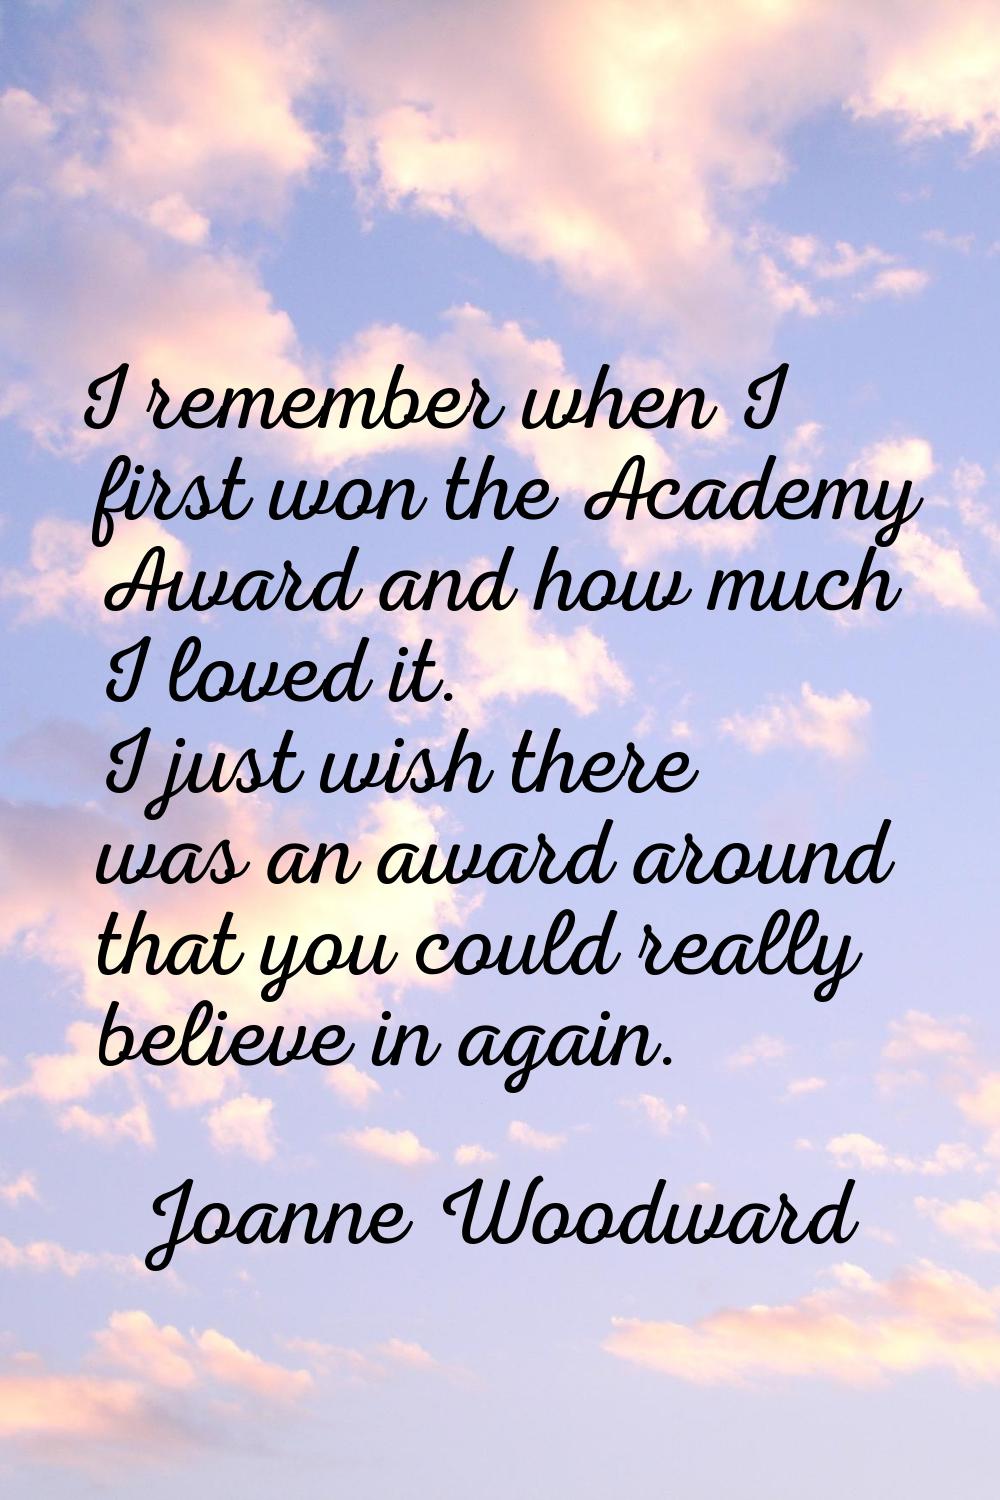 I remember when I first won the Academy Award and how much I loved it. I just wish there was an awa